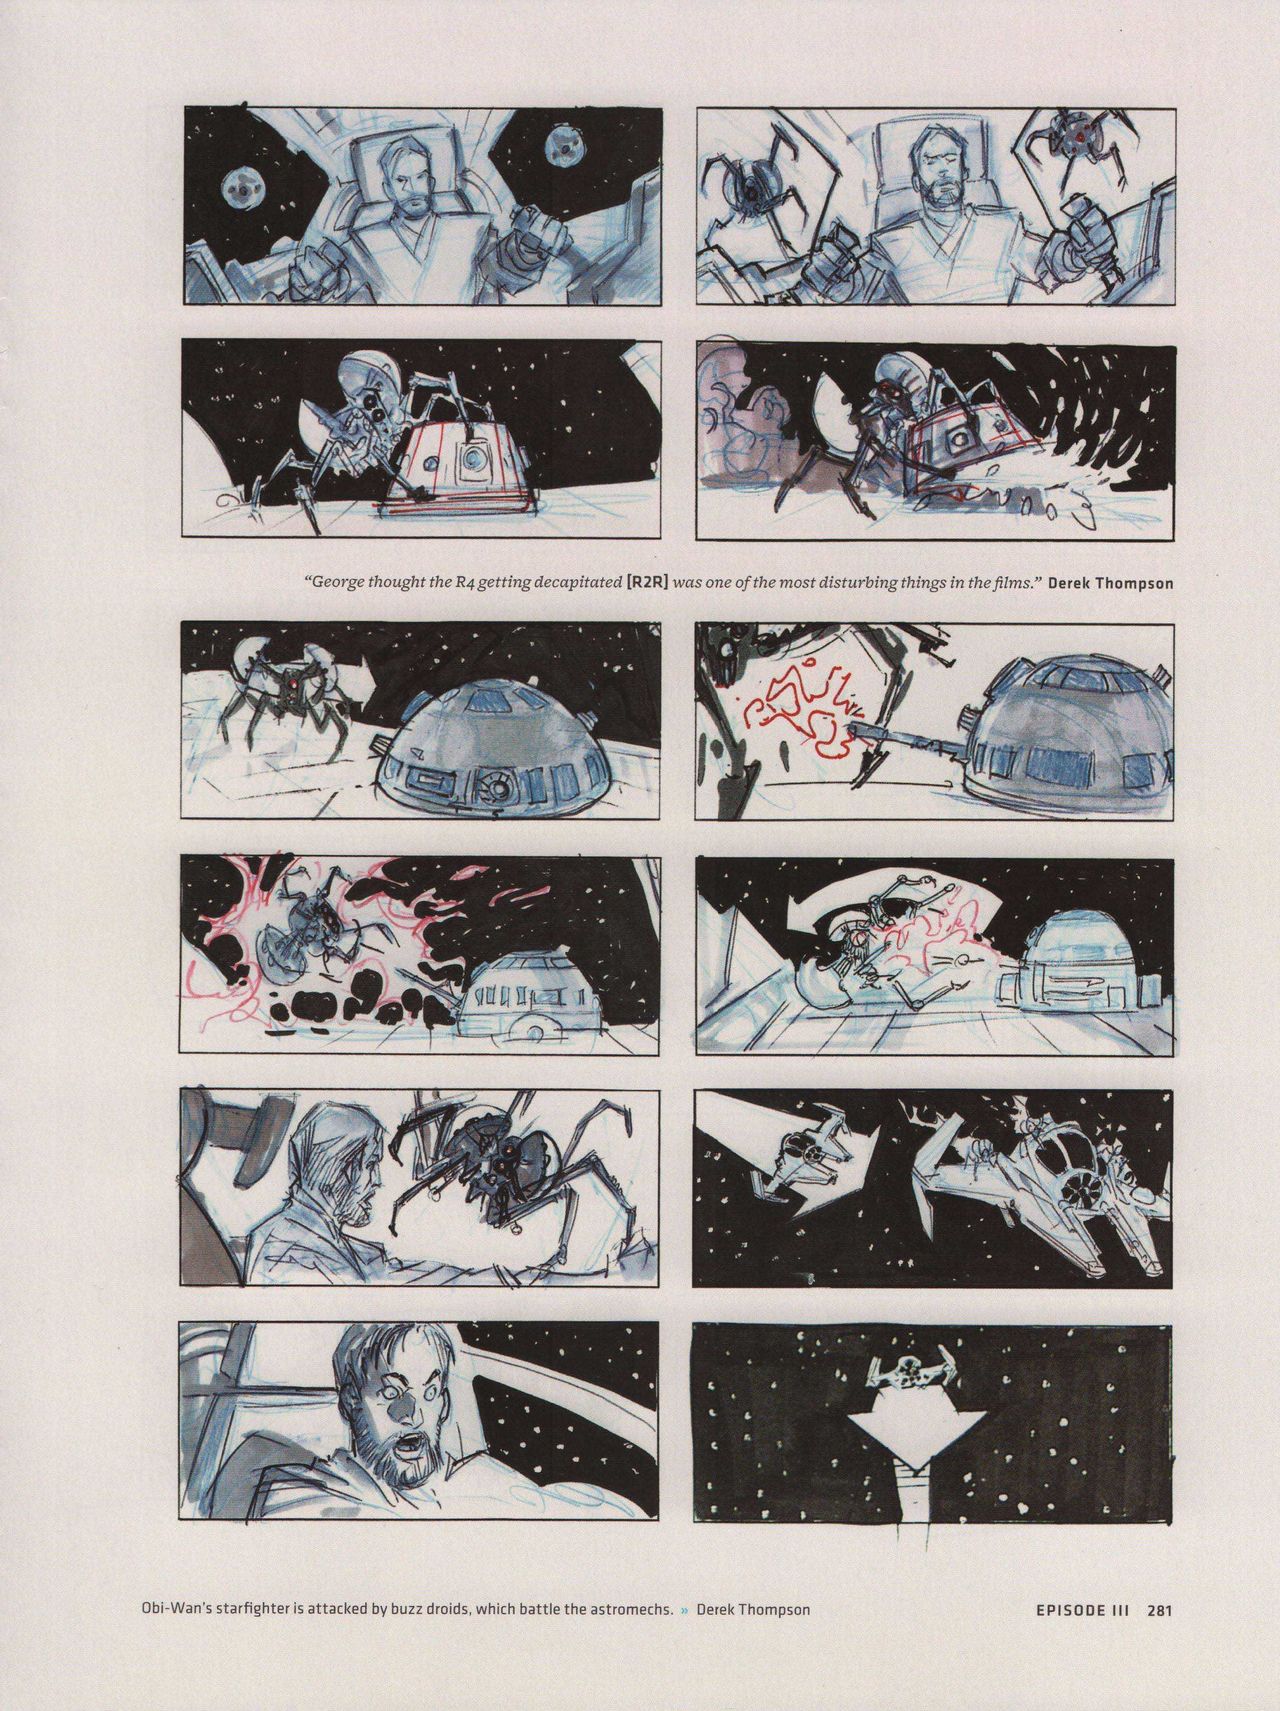 Star Wars Storyboards - The Prequel Trilogy 285